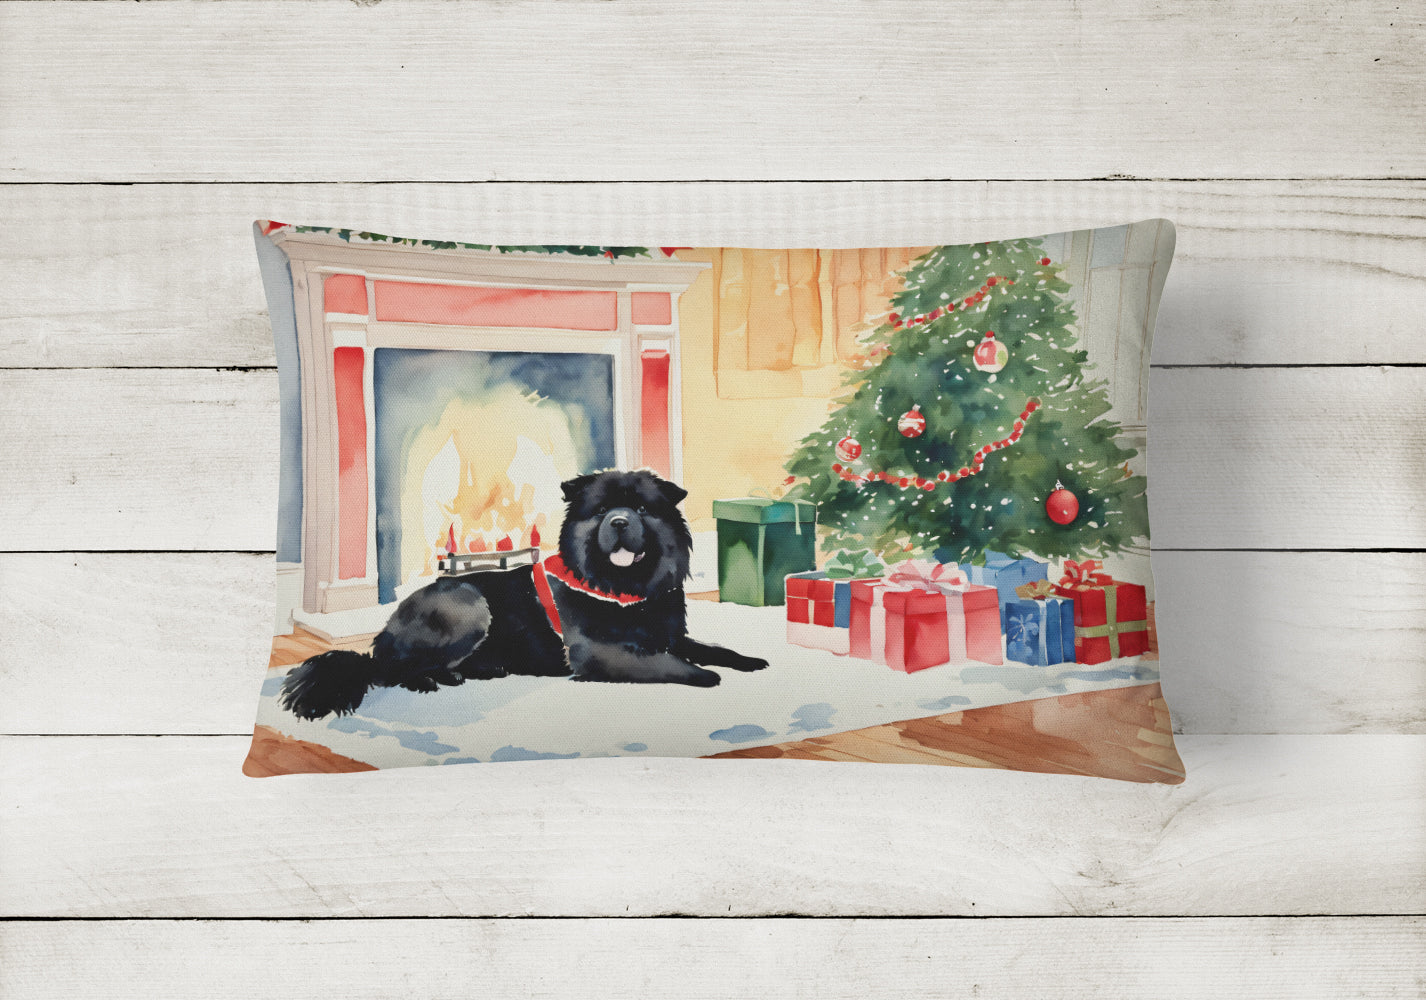 Buy this Chow Chow Cozy Christmas Throw Pillow